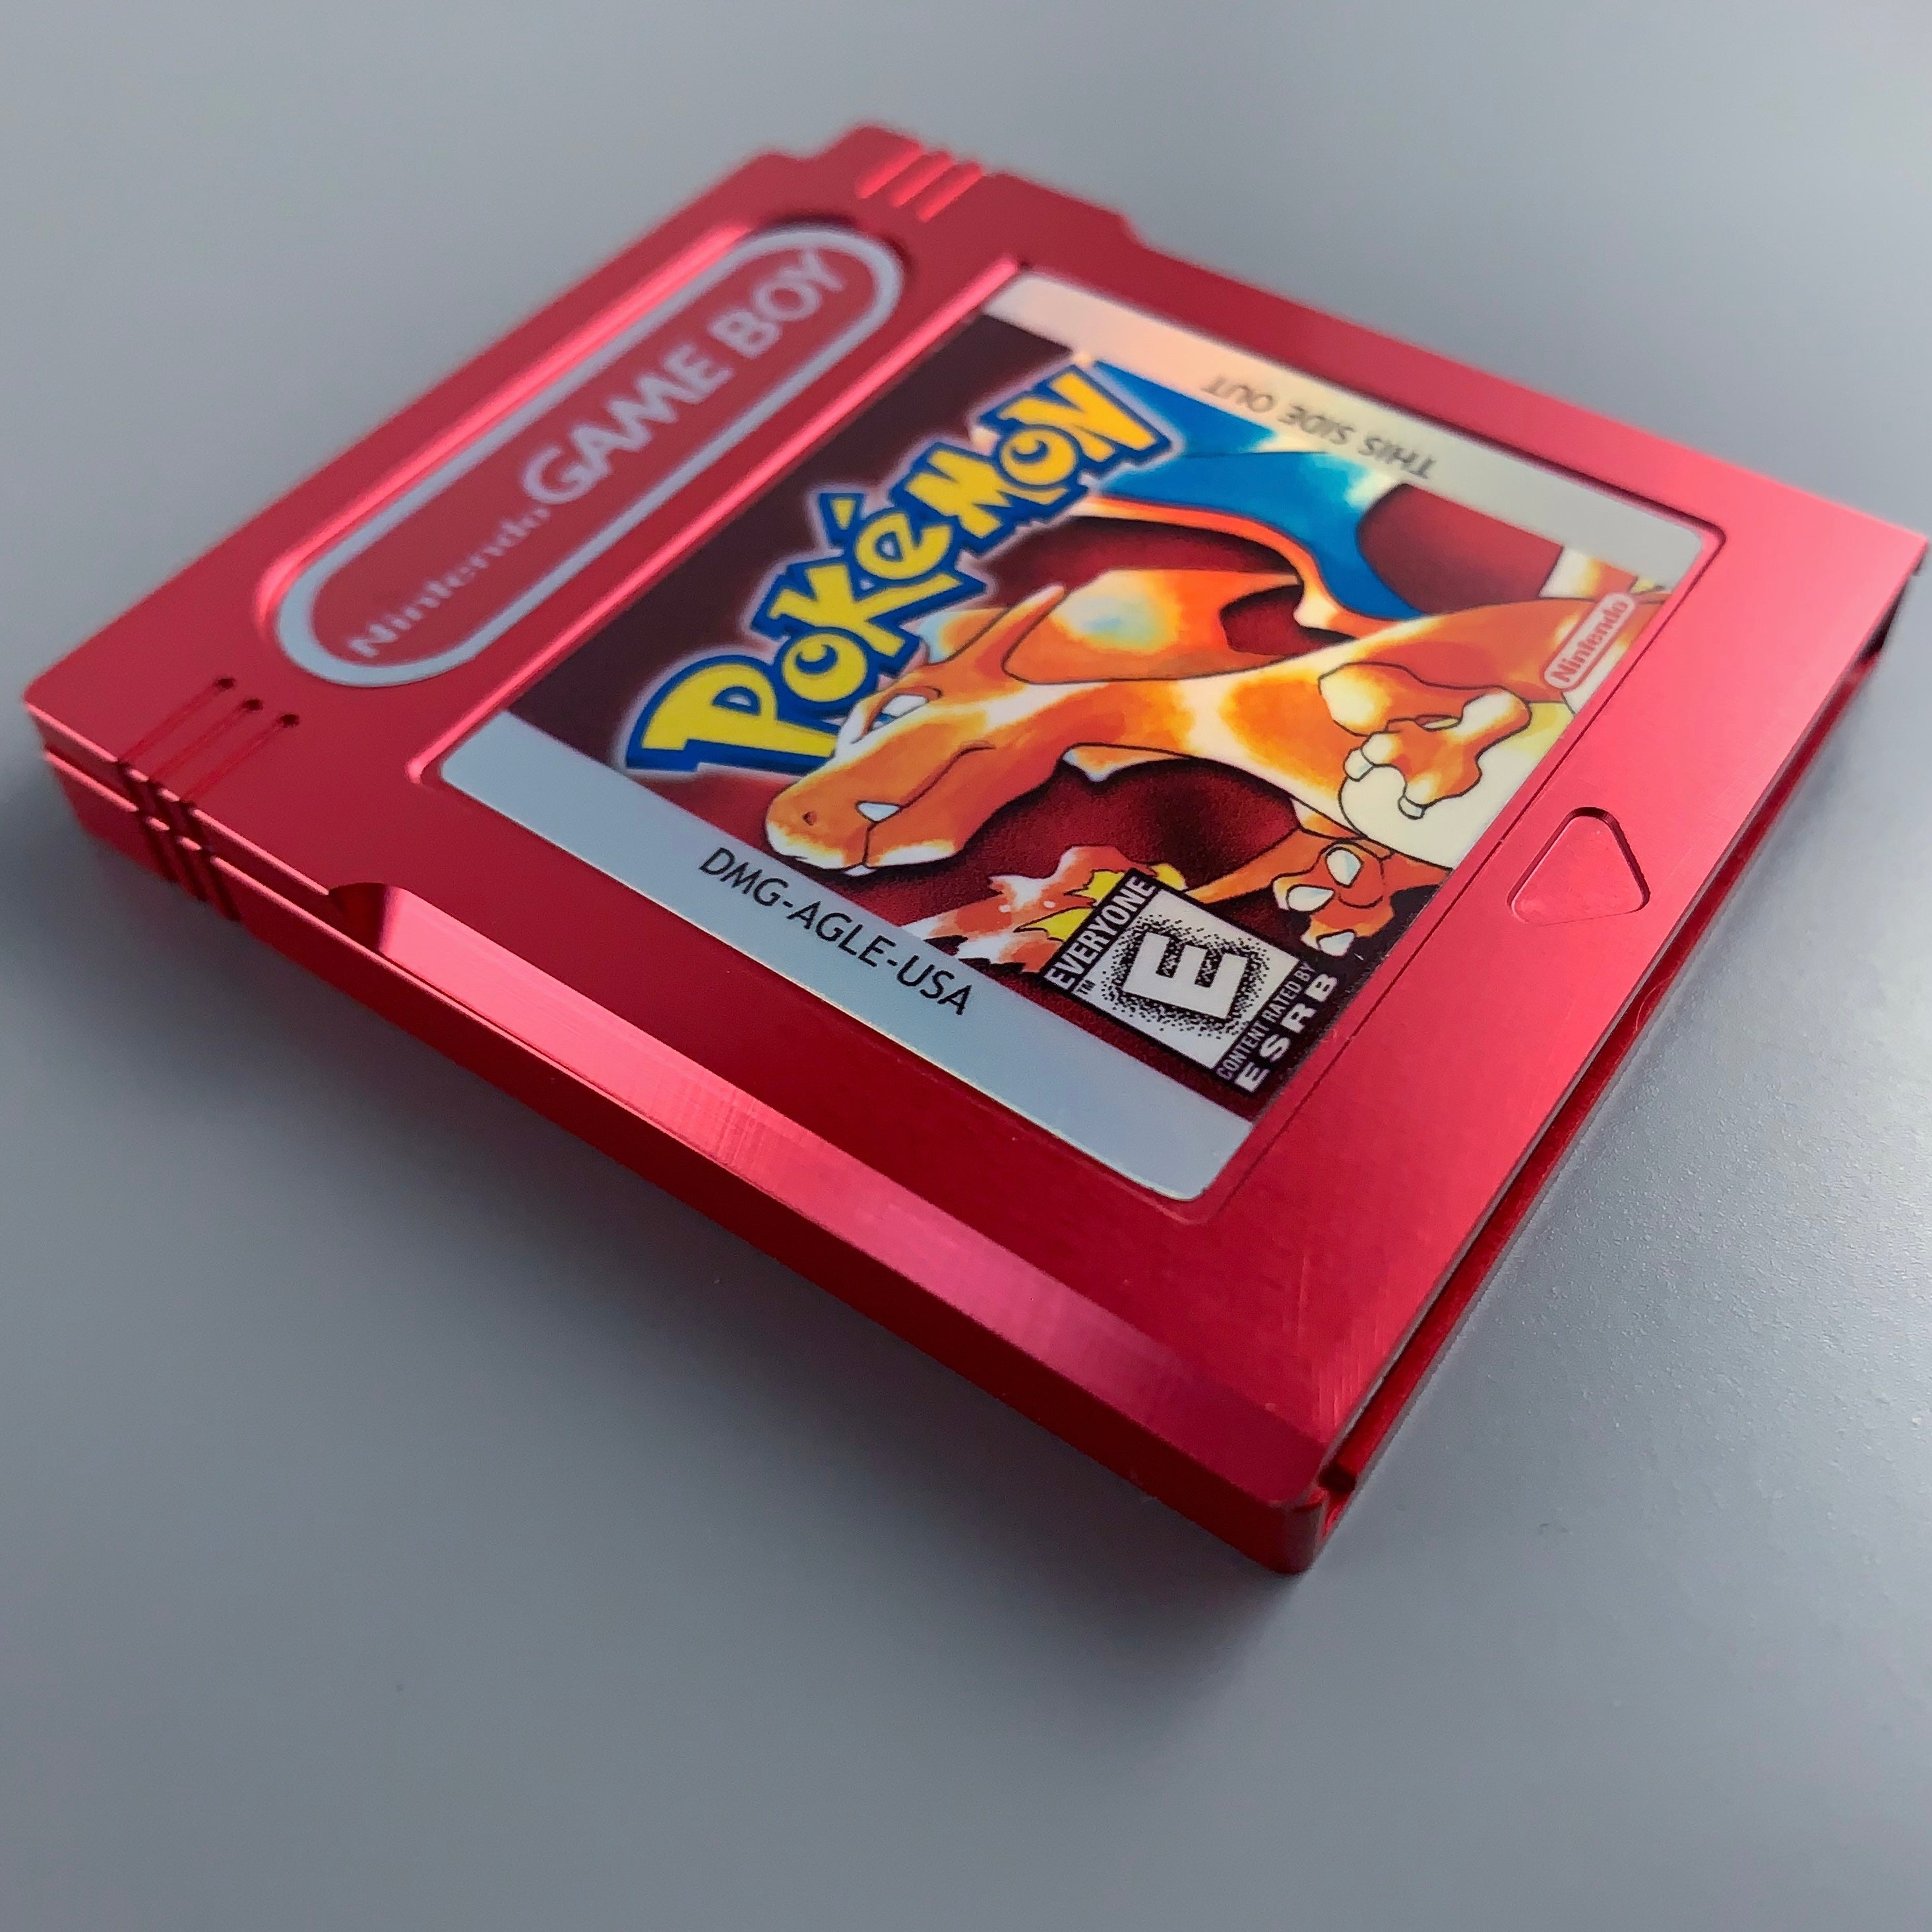 Pokemon Red Box with manual and game Nintendo Gameboy